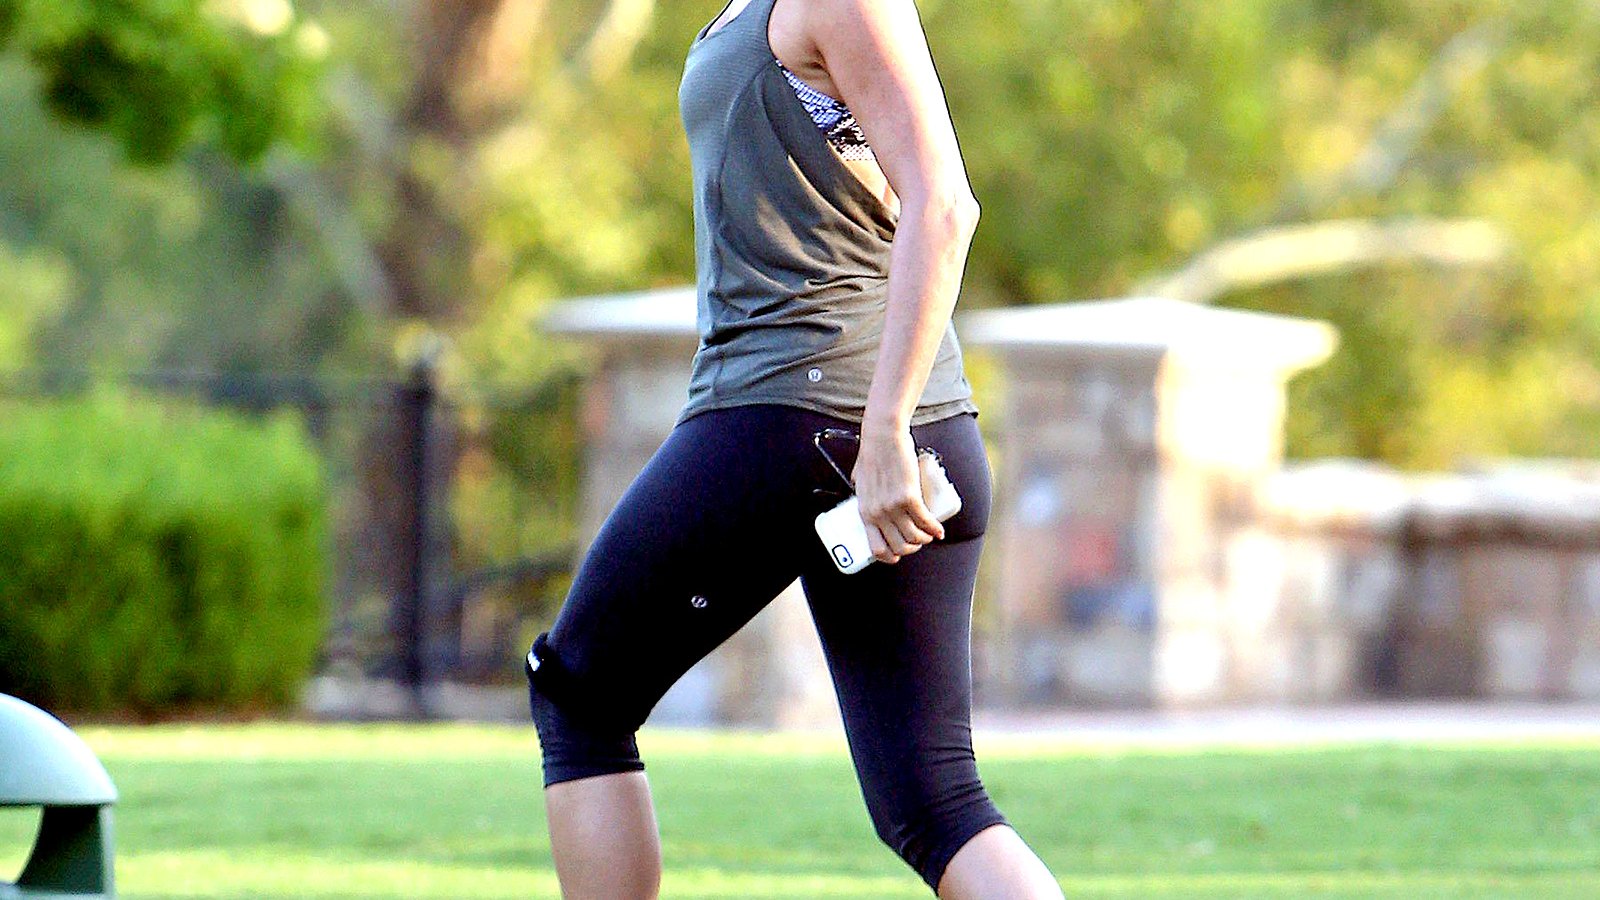 Jennifer Aniston Works Her Toned Body in Yoga Pants: Photos